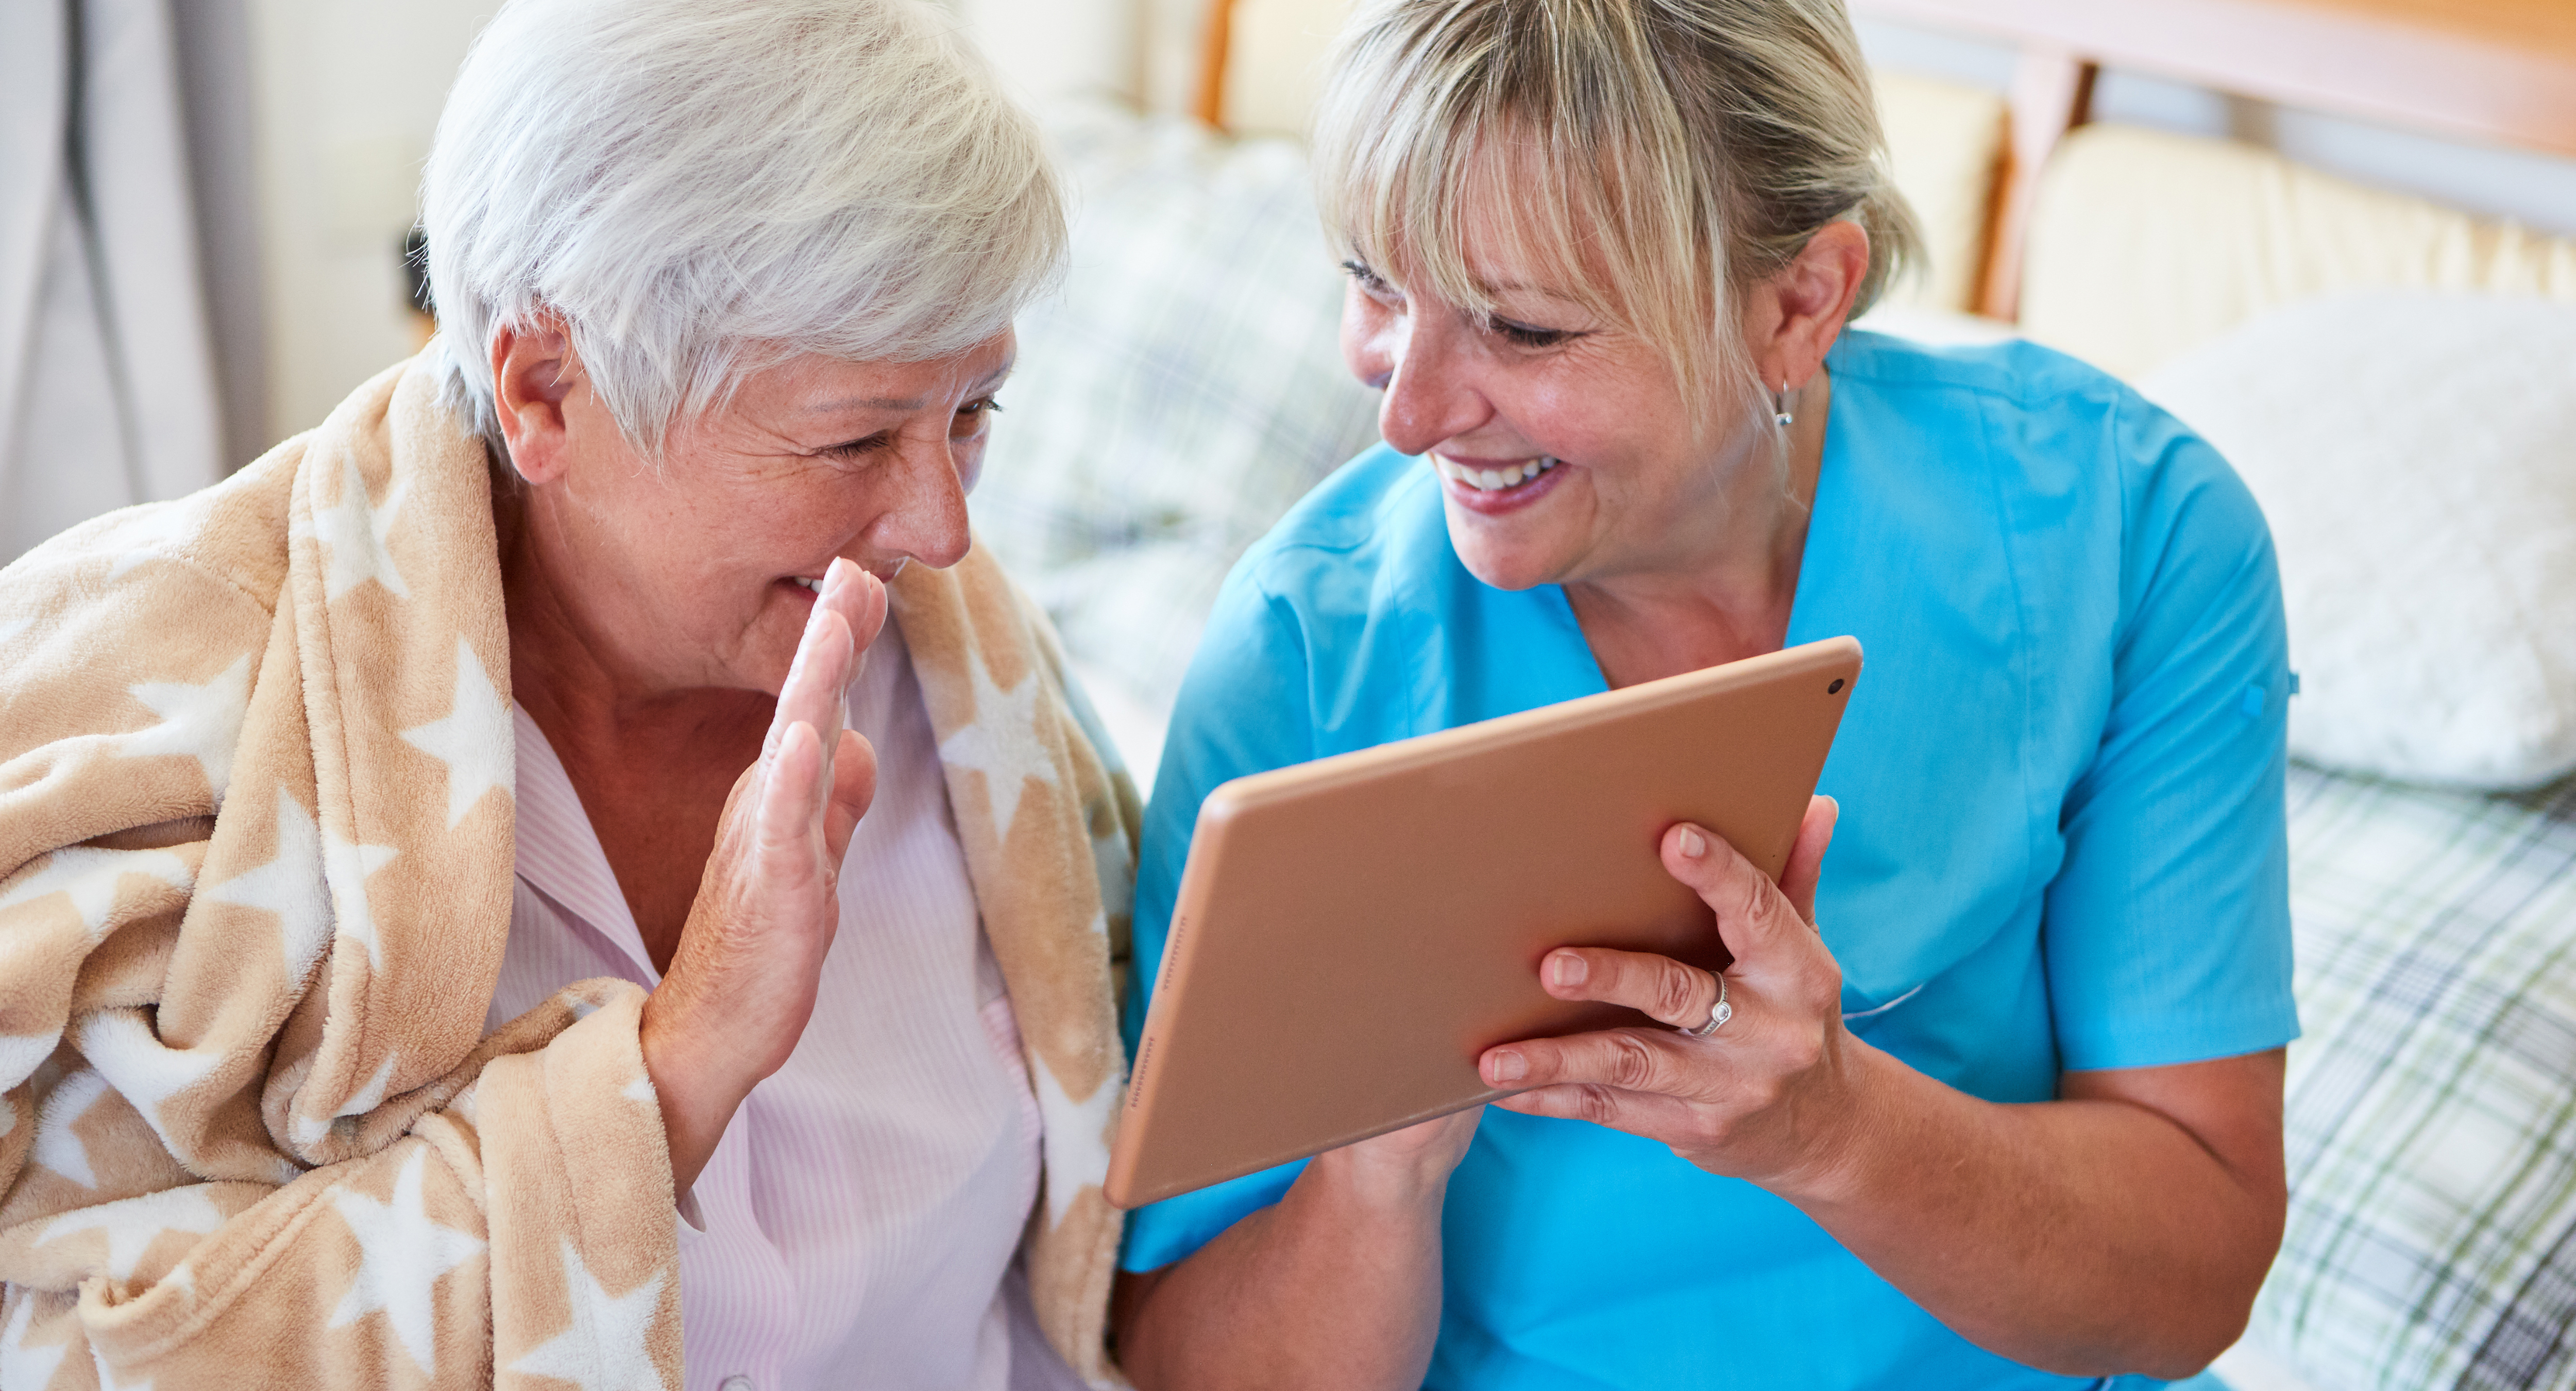 Mobility solutions for caregivers and residents